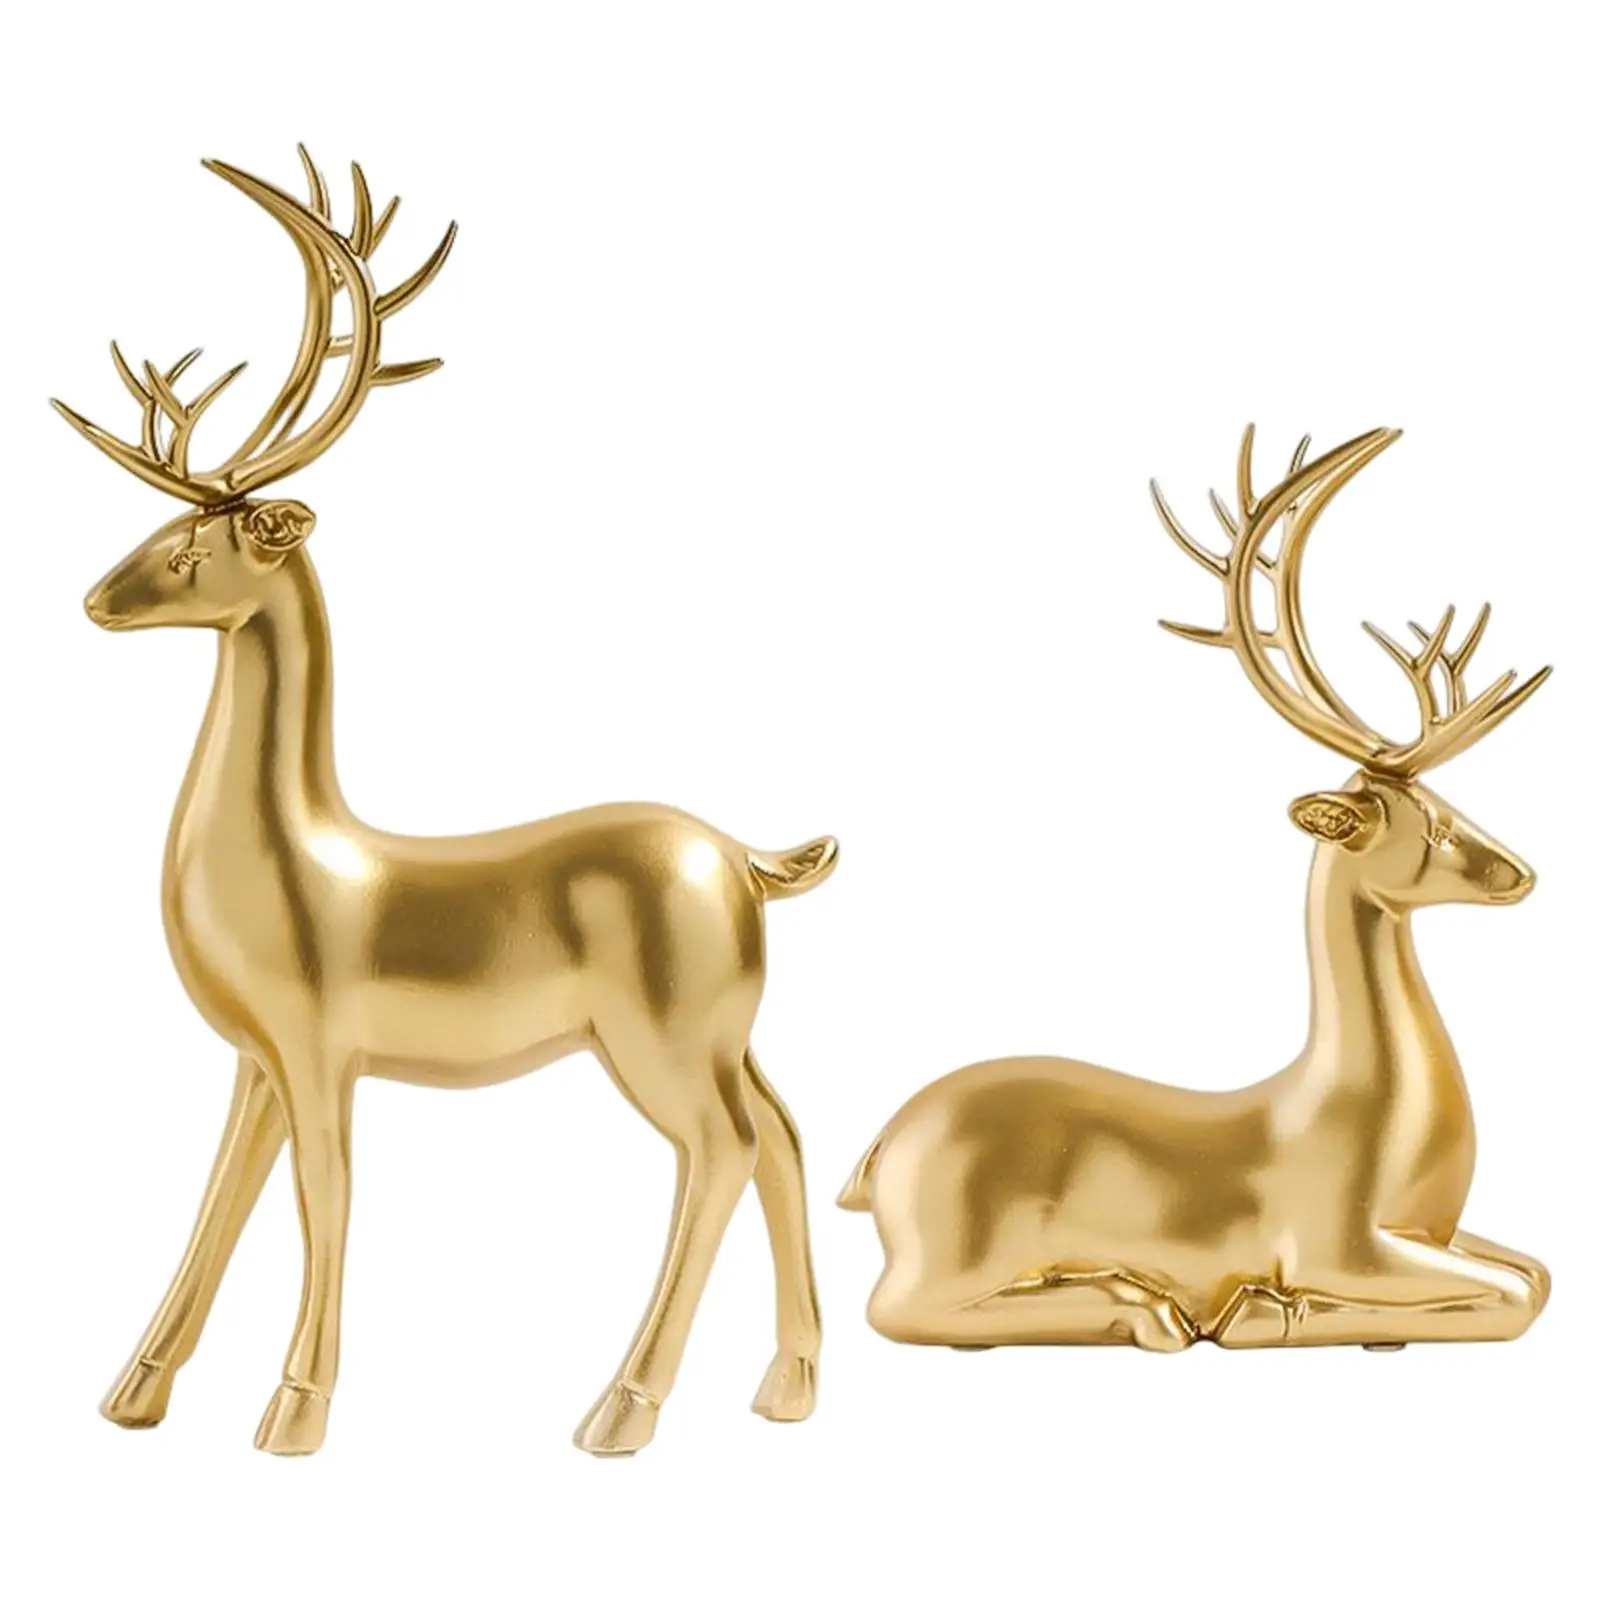 Couple Deer Statue Standing and Sitting Reindeer Figurine Resin Sculpture Ornaments Accents for Party Home Office Holiday Decor